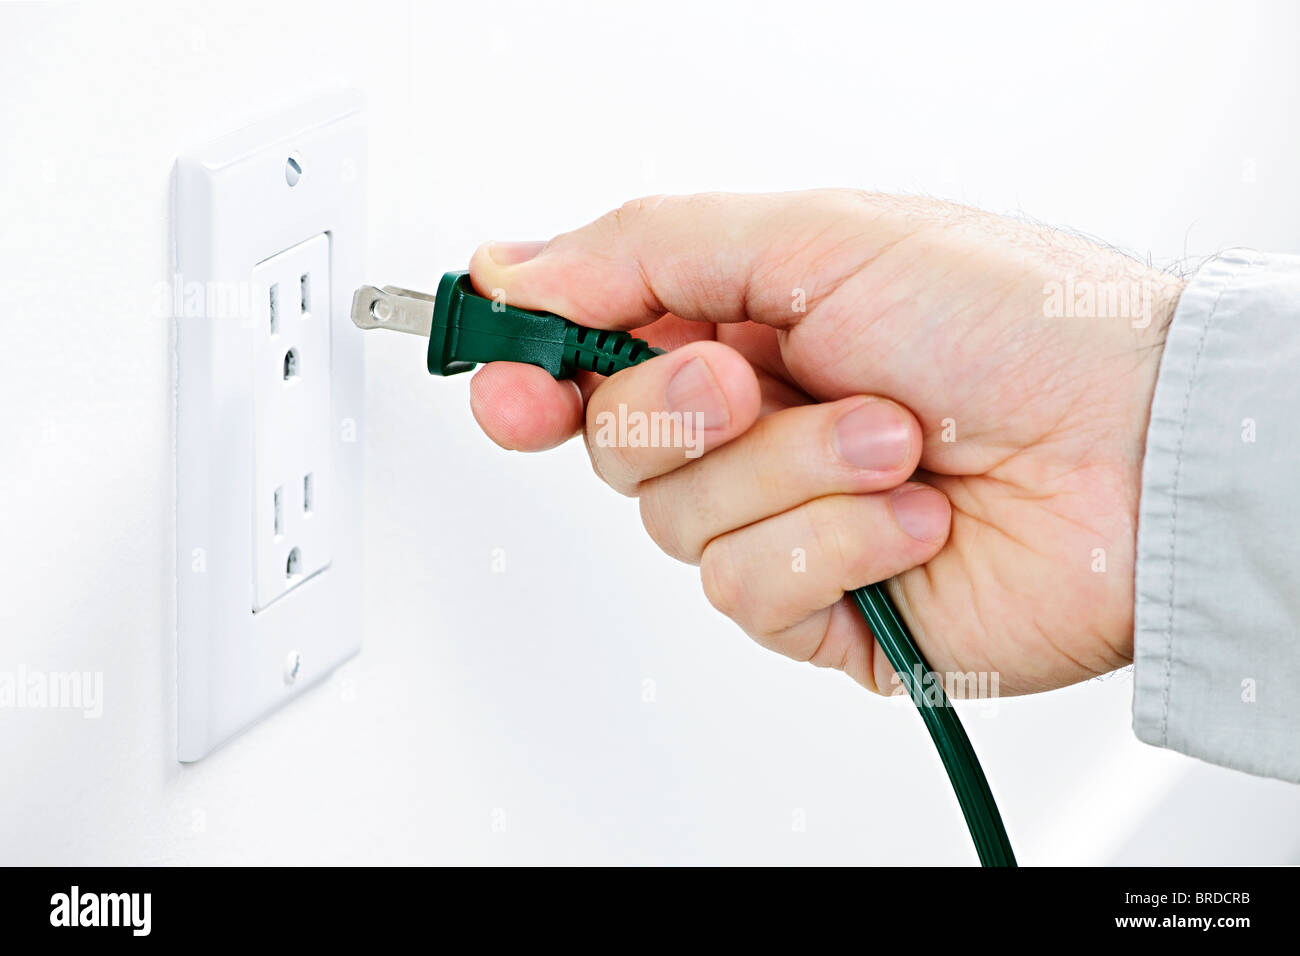 Hand inserting green electrical plug into outlet Stock Photo